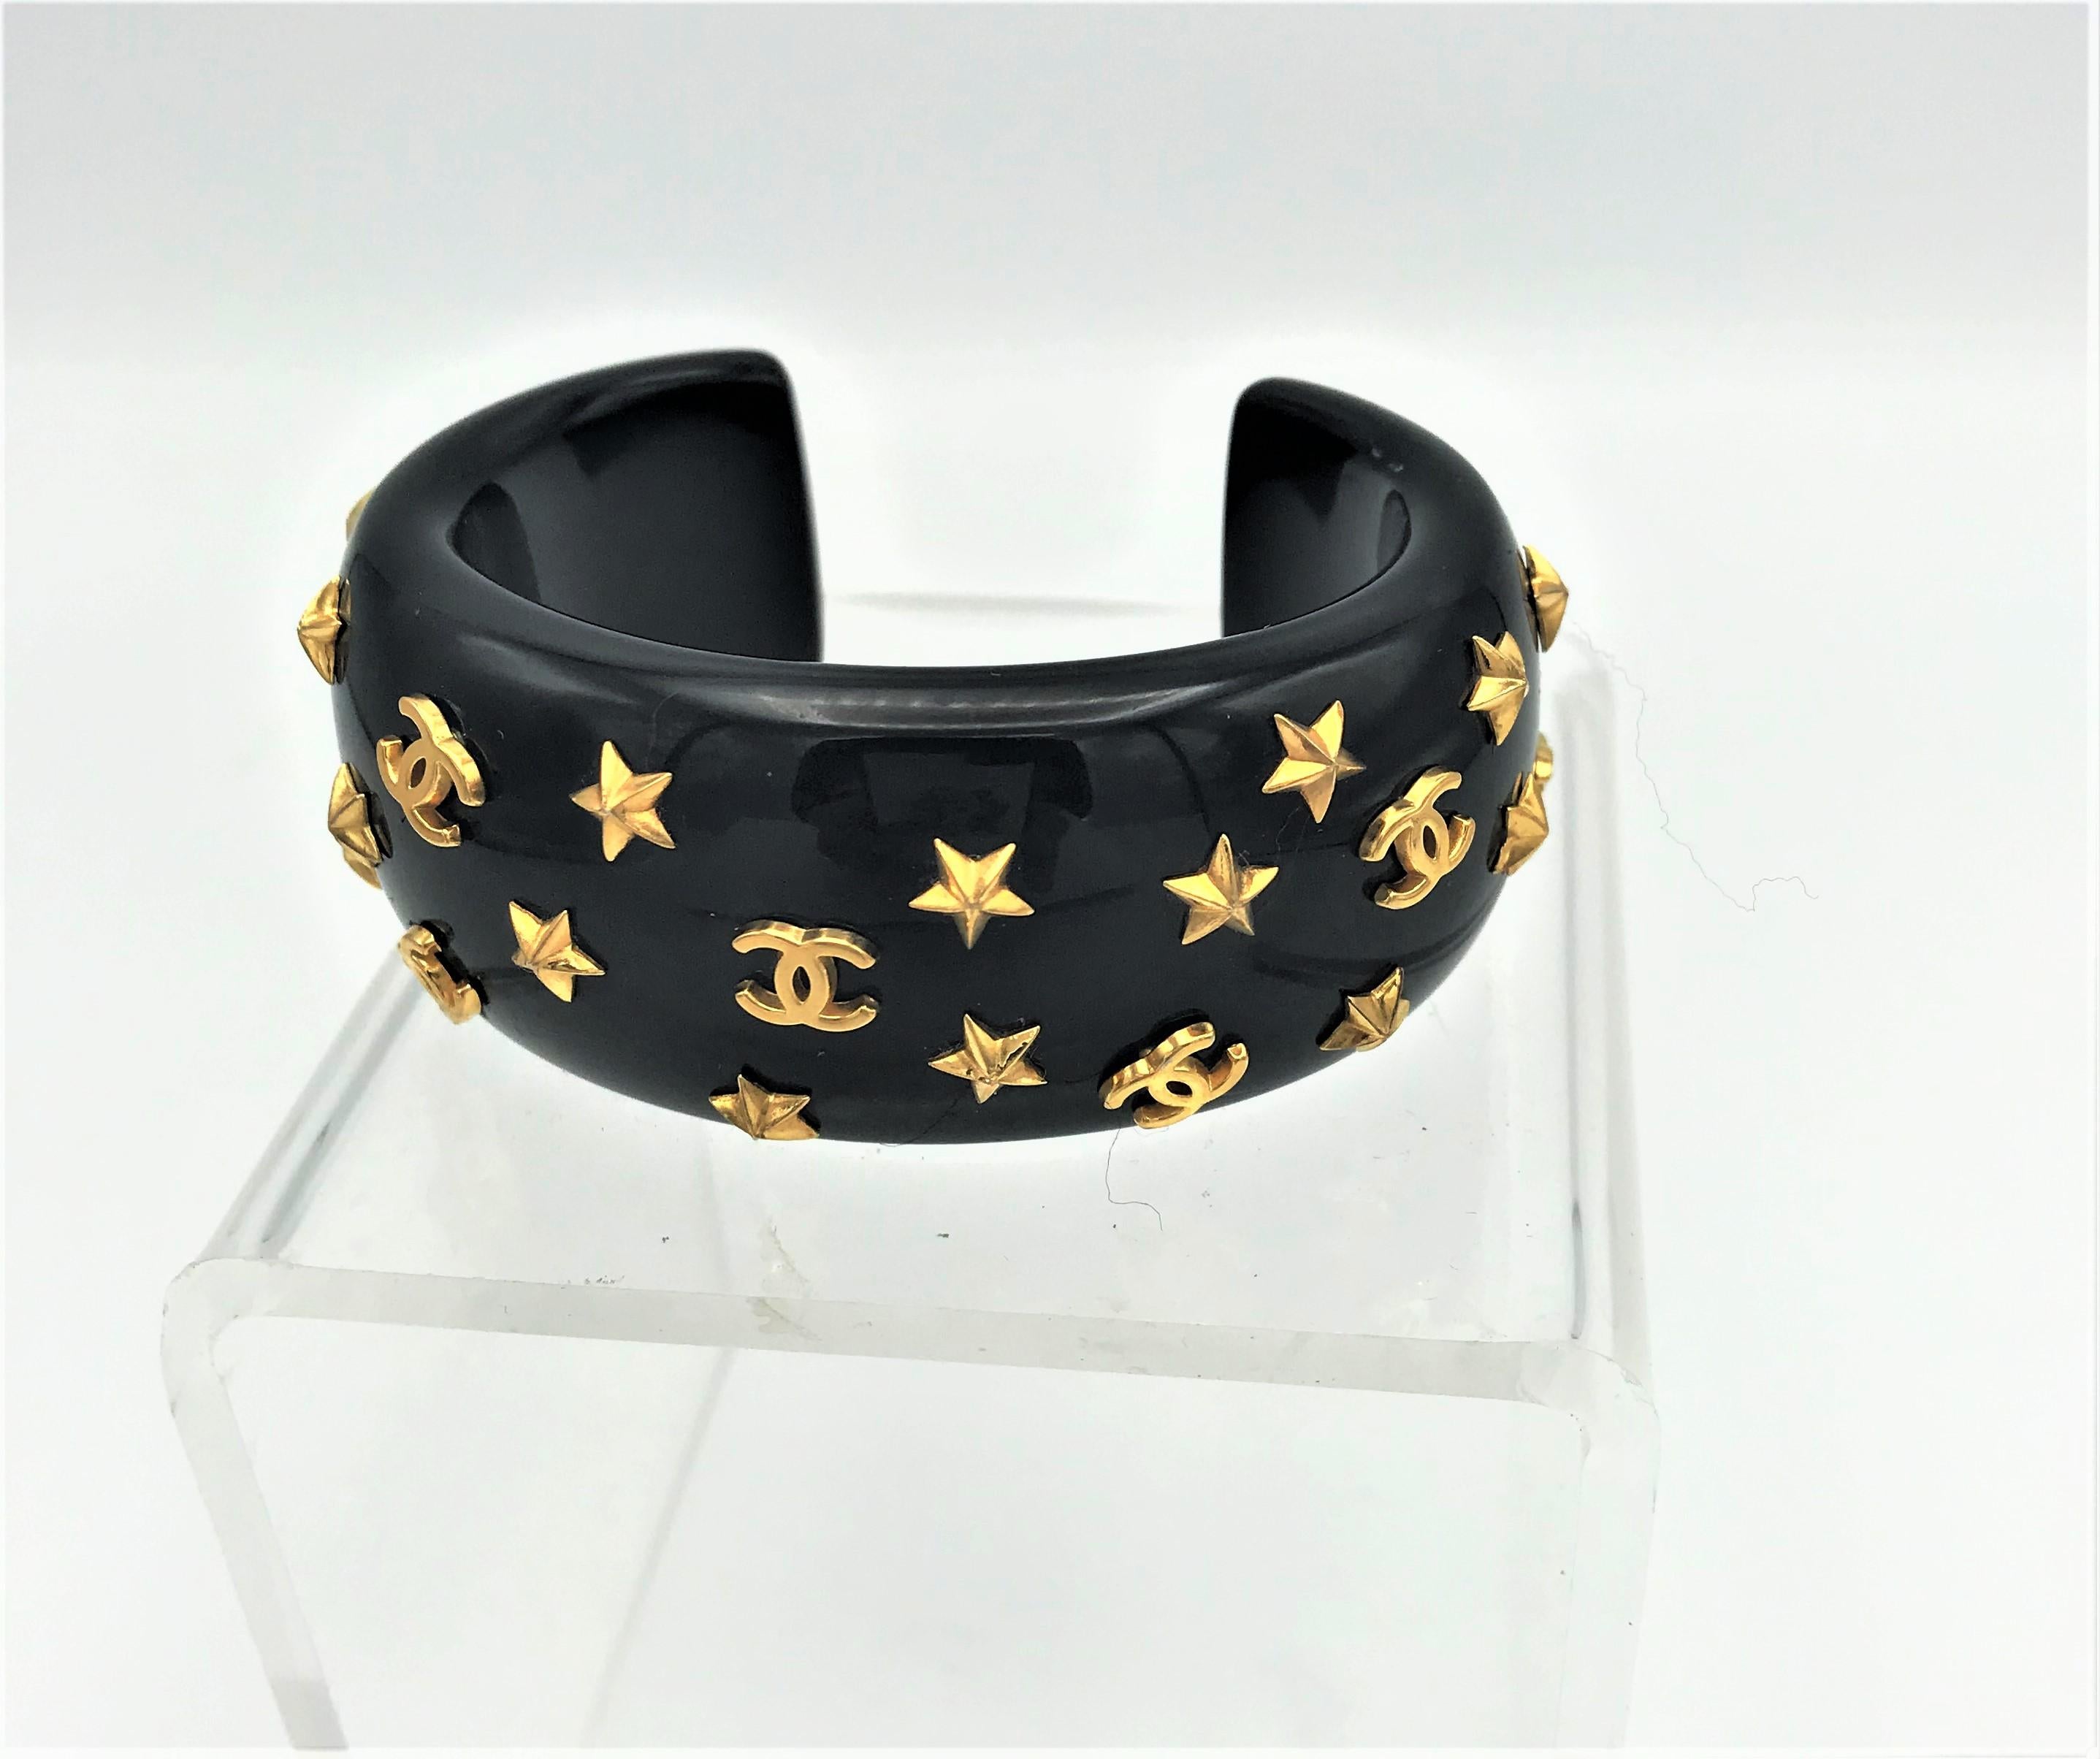 Lovely black bracelet - cuff ore manschet constellated molded plastic from the autum-winter collection 1995. Busy with many gold  stars and 10 unique Chanel CCs,  designed by  Victoire de Castellane. signed on a plate inside.
Measurement: The height